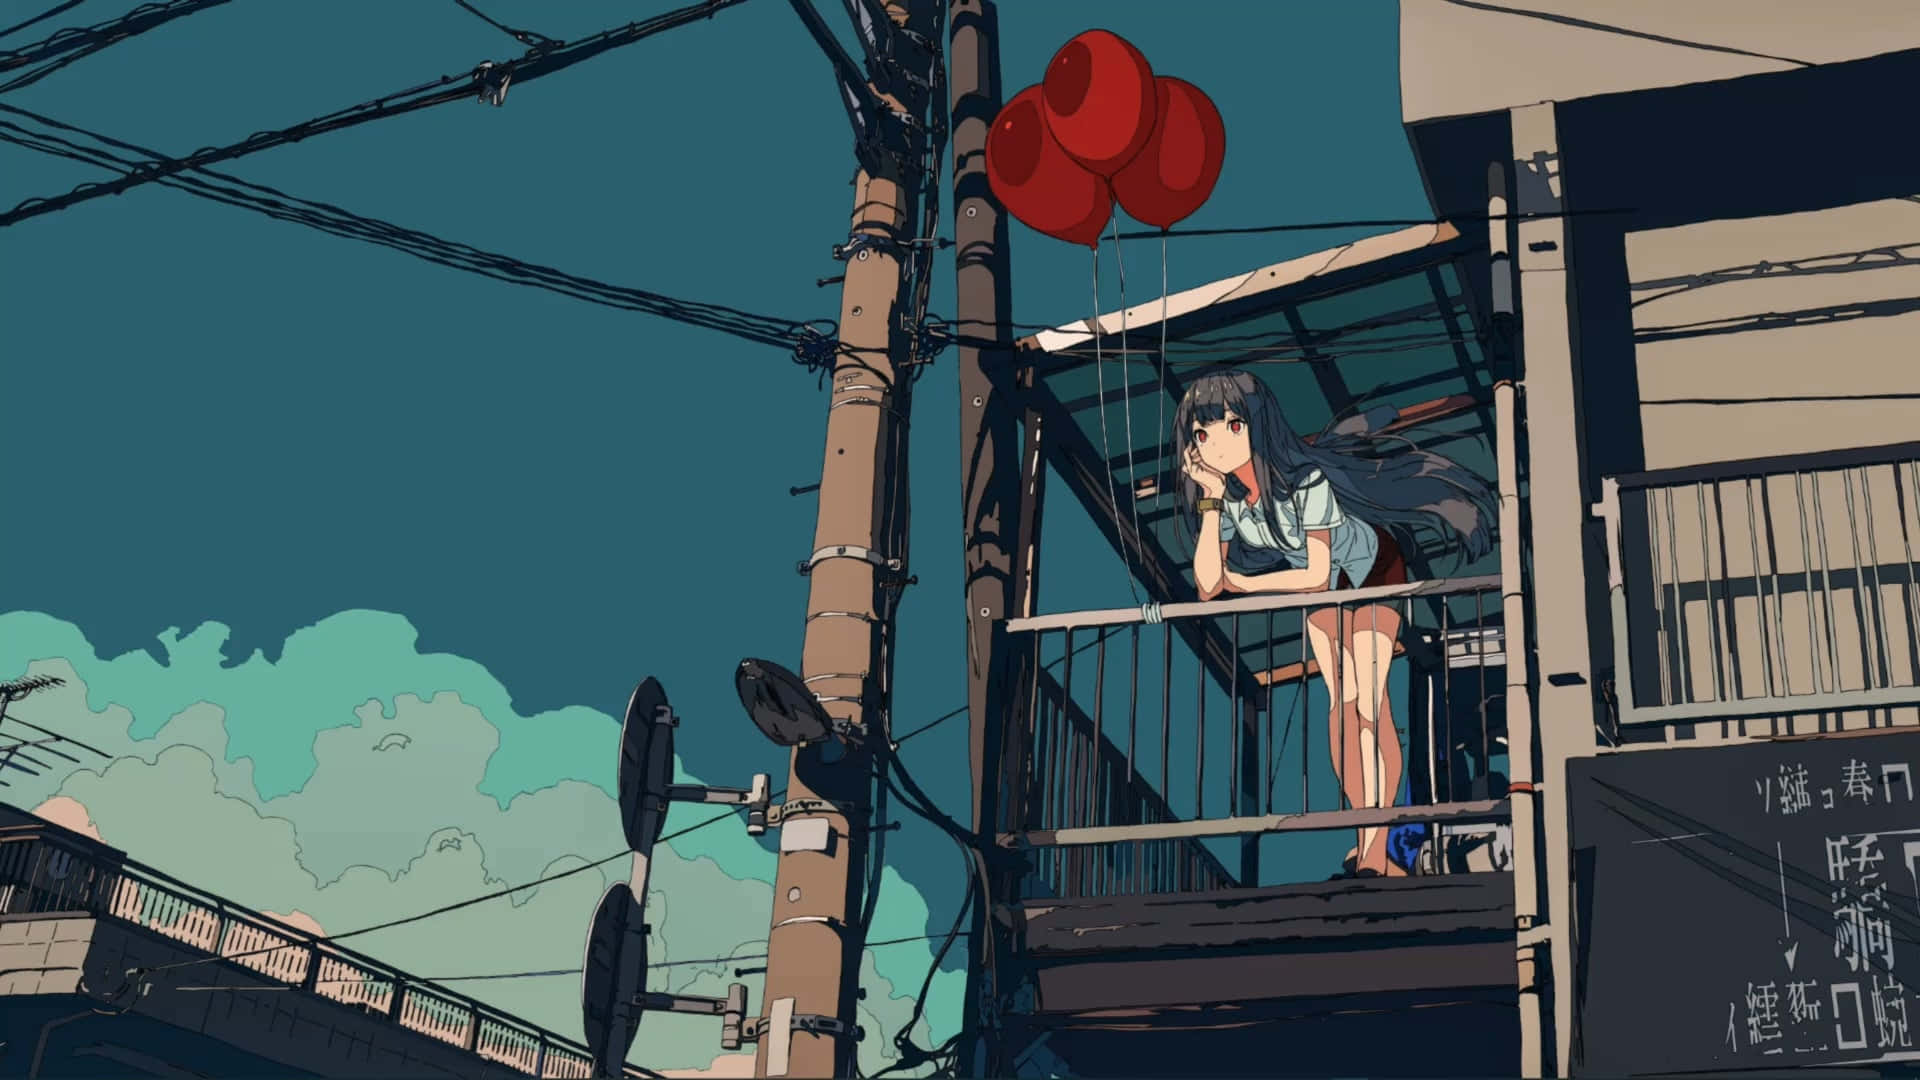 Lo Fi Anime Chill Girl With Red Balloons In Balcony Wallpaper